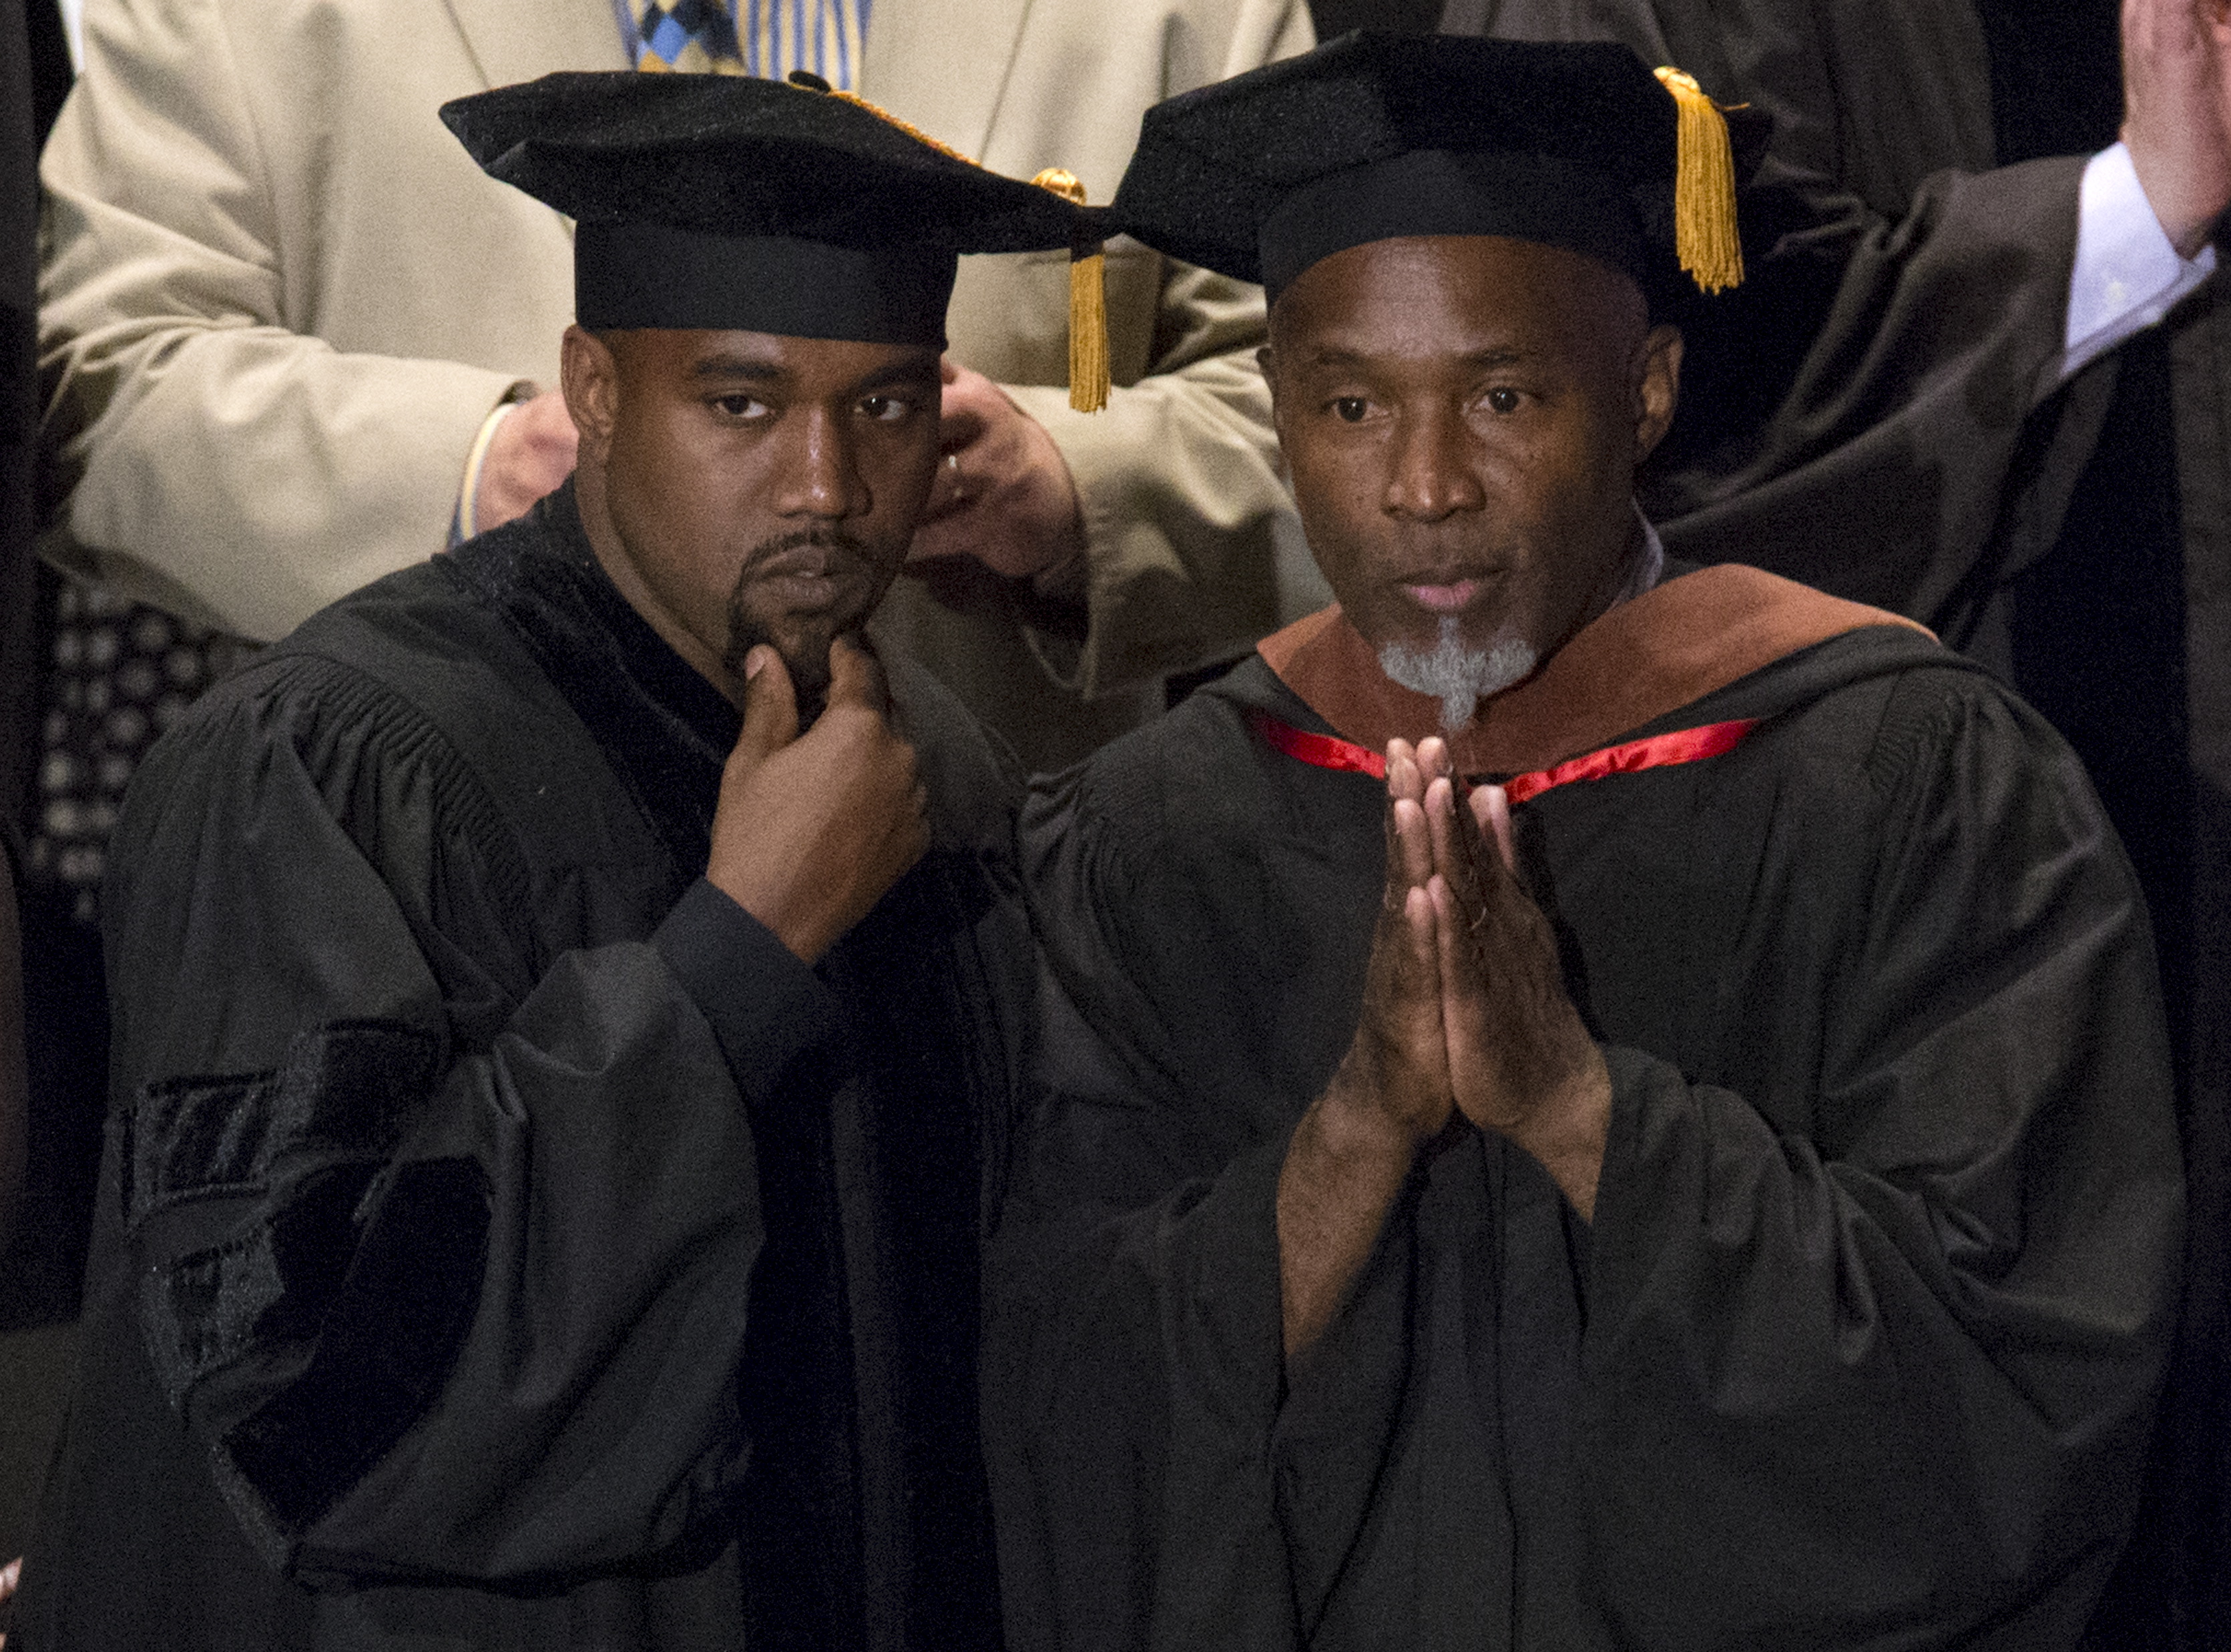 Musician Kanye West and School of the Art Institute of Chicago Professor Nick Cave attend the school's annual commencement ceremony where West received an honorary doctorate degree in Chicago, Illinois on May 11, 2015